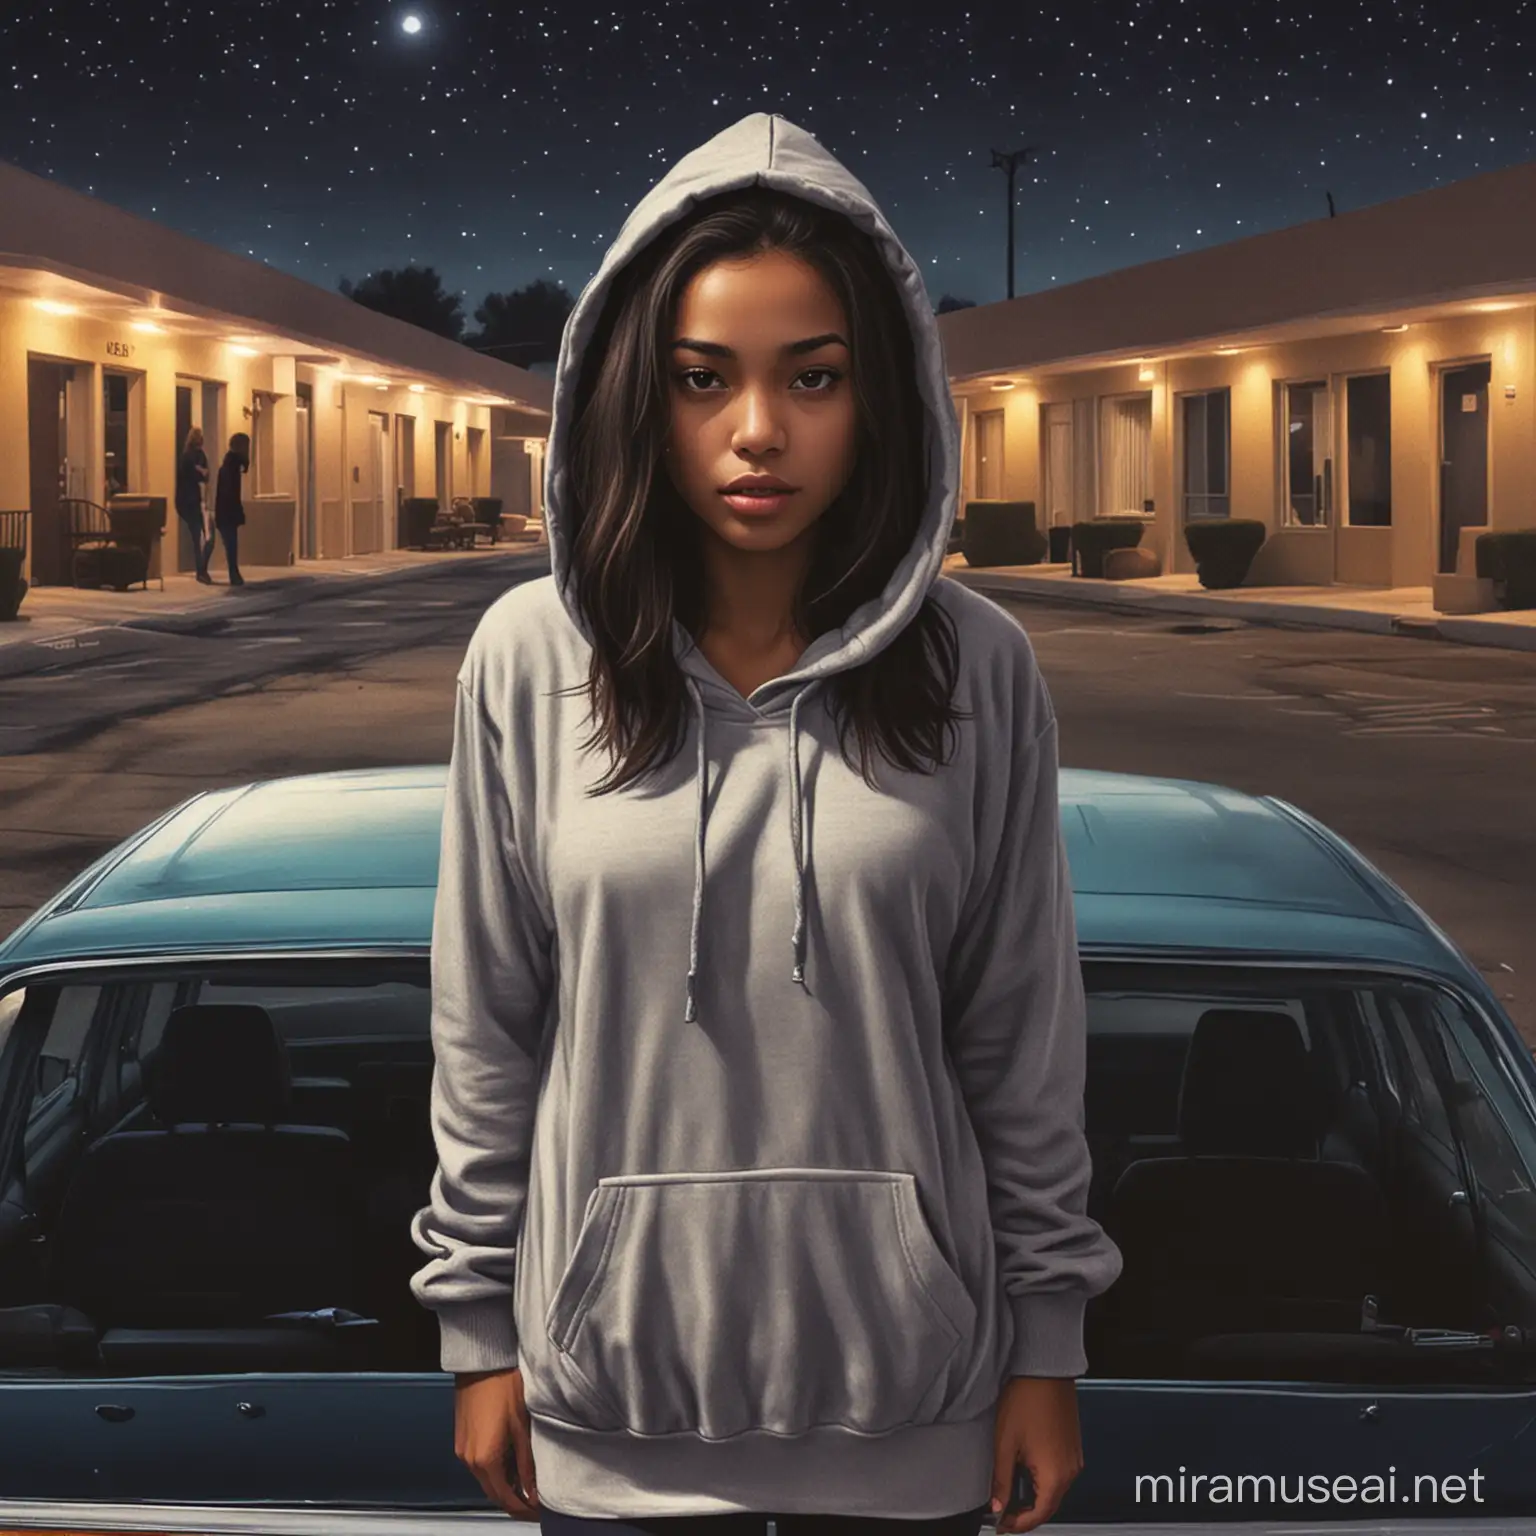 For a mystery book cover, please show a seedy motel at night. A young girl being led from a car with her back facing the viewer in the center of the frame. Please show the young woman in a hoodie, not sexy, being dragged from a car into the motel. women is mixed race. Back is to the viewer so you can't see her face
